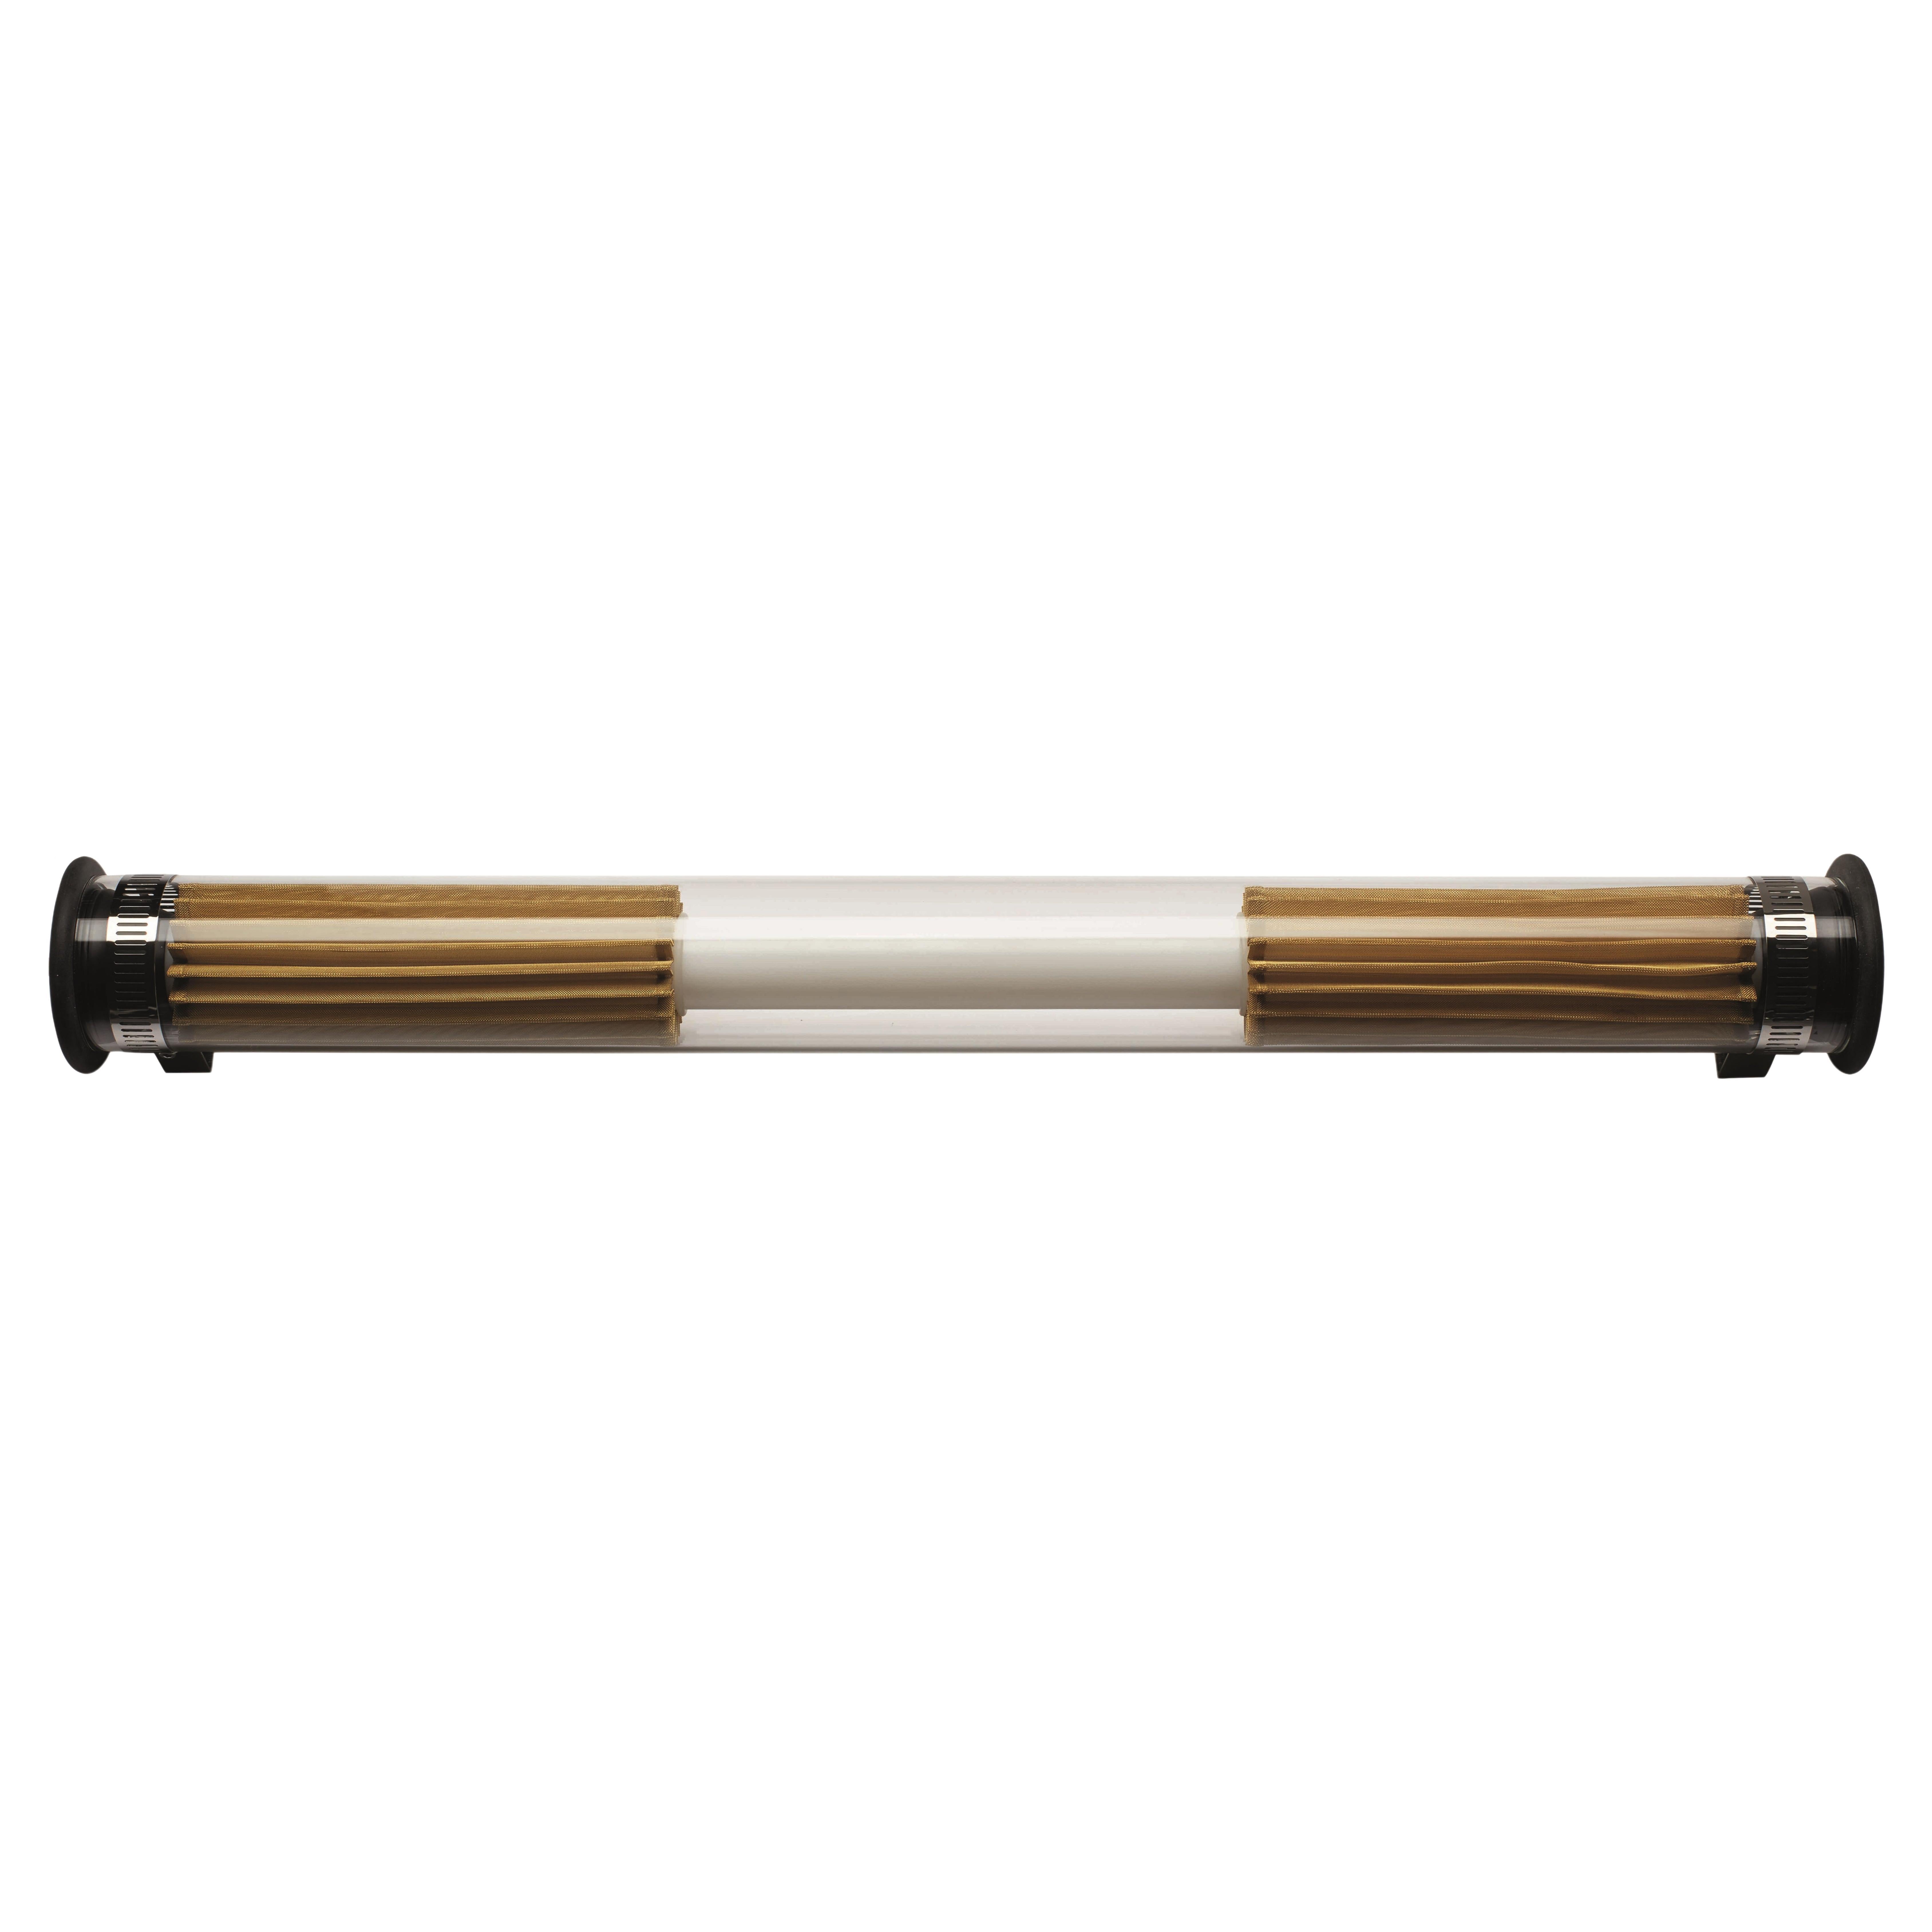 DCW Editions In The Tube 360° 700 Wand- und Pendelleuchte in Gold Mesh im Angebot